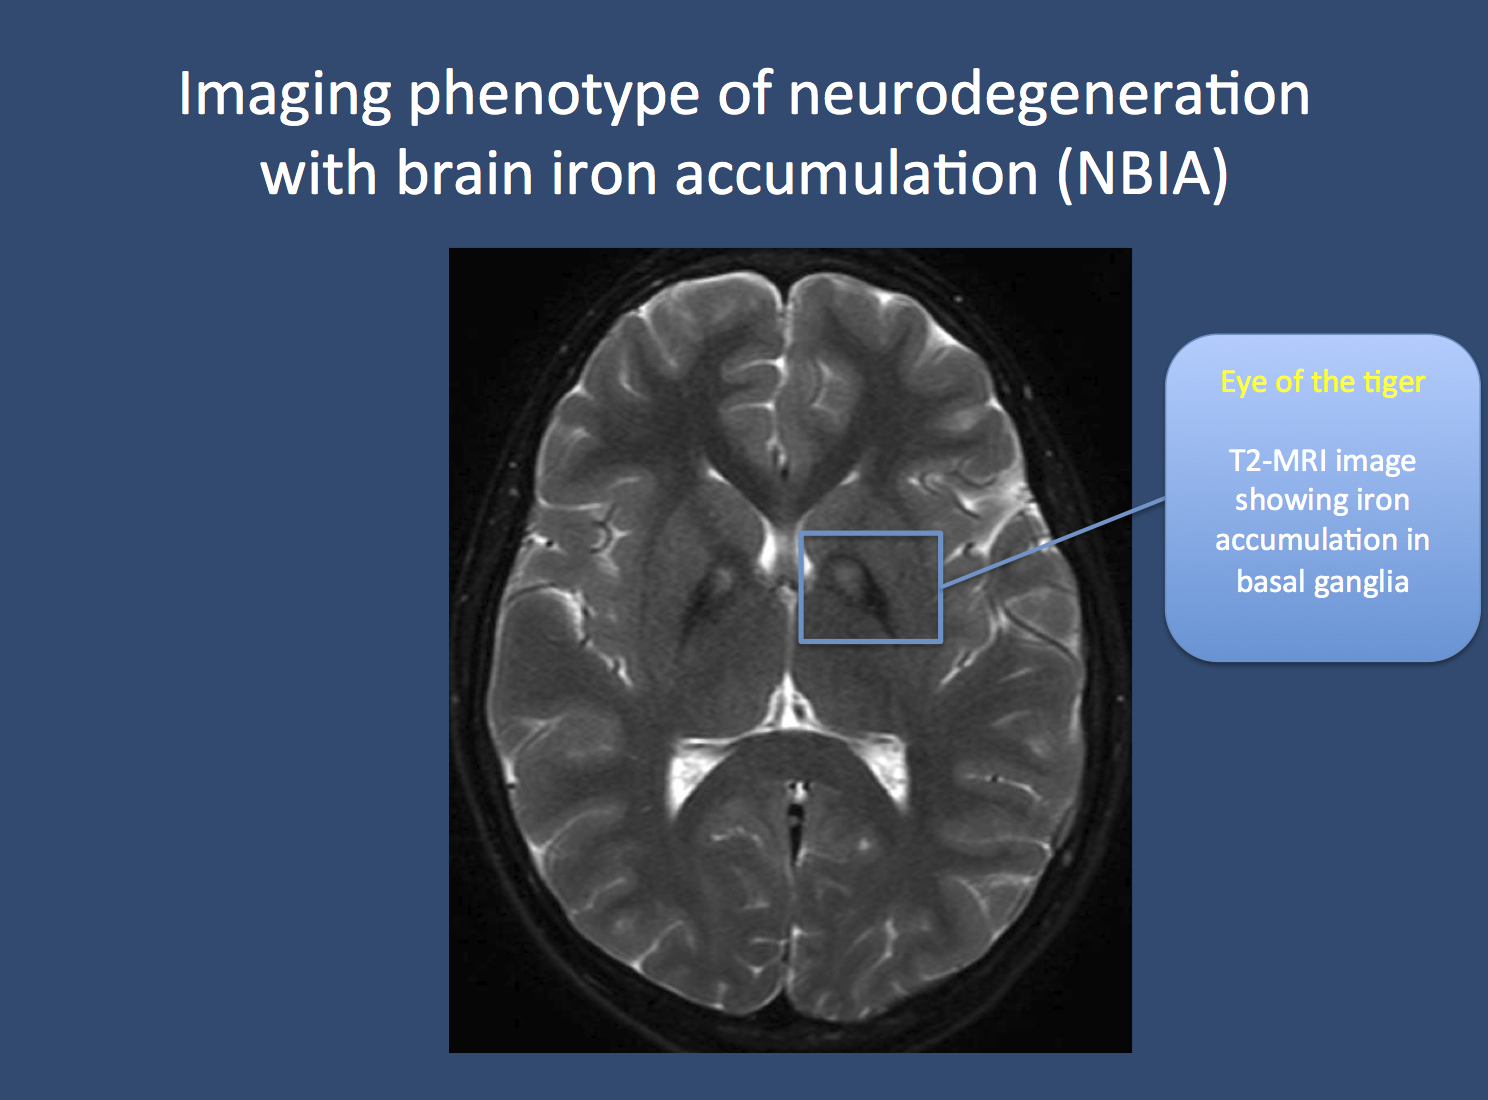 The eye of the tiger. Pantothenate kinase-associated neurodegeneration (PKAN), formerly known as Hallervorden-Spatz disease, is usually associated with a pathognomonic finding on MRI imaging. Due to the accumulation of iron in the basal ganglia, two black spots can be seen, which is referred to as the “eye of the tiger” sign. PKAN is part of a group of disorders referred to as neurodegeneration with brain iron accumulation. Image from Wikimedia commons (http://commons.wikimedia.org/wiki/File:Pkan-basal-ganglia-MRI.JPG), within the framework of the Creative Commons license. 